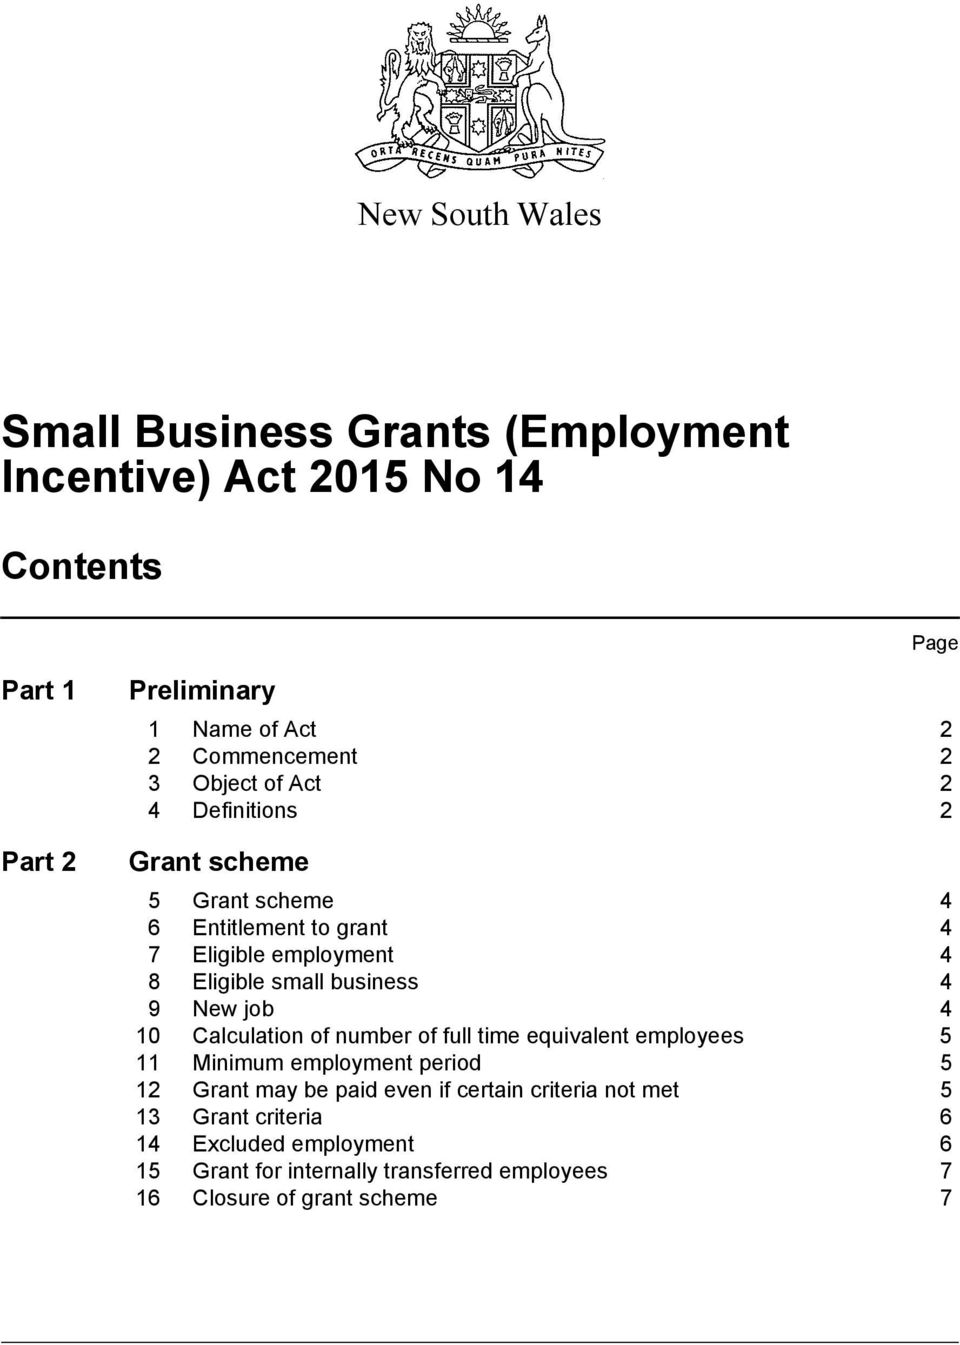 small business 4 9 New job 4 10 Calculation of number of full time equivalent employees 5 11 Minimum employment period 5 12 Grant may be paid